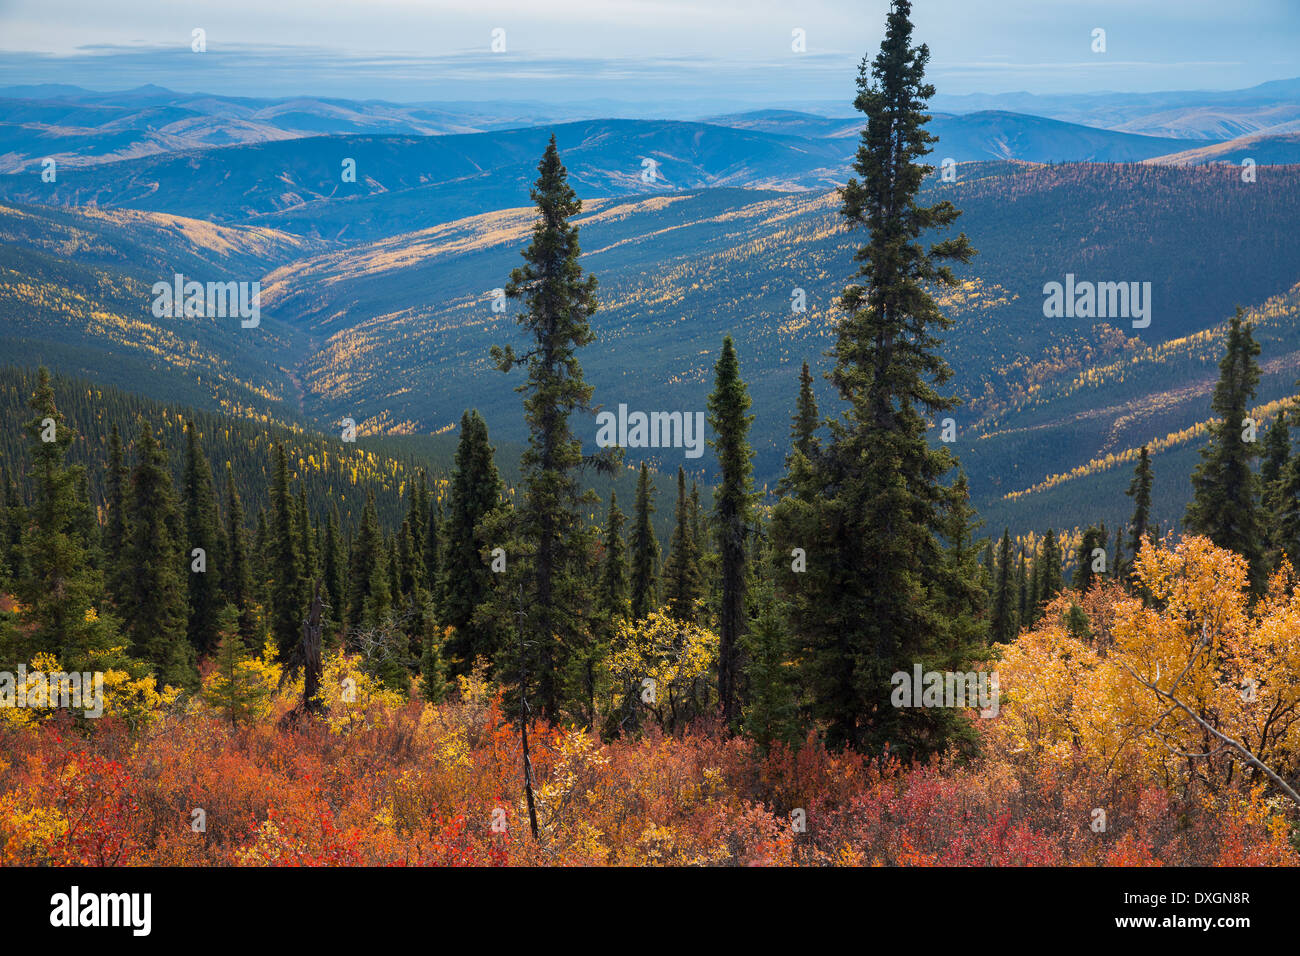 The view from the Top of the World Highway, Yukon Territories, Canada Stock Photo